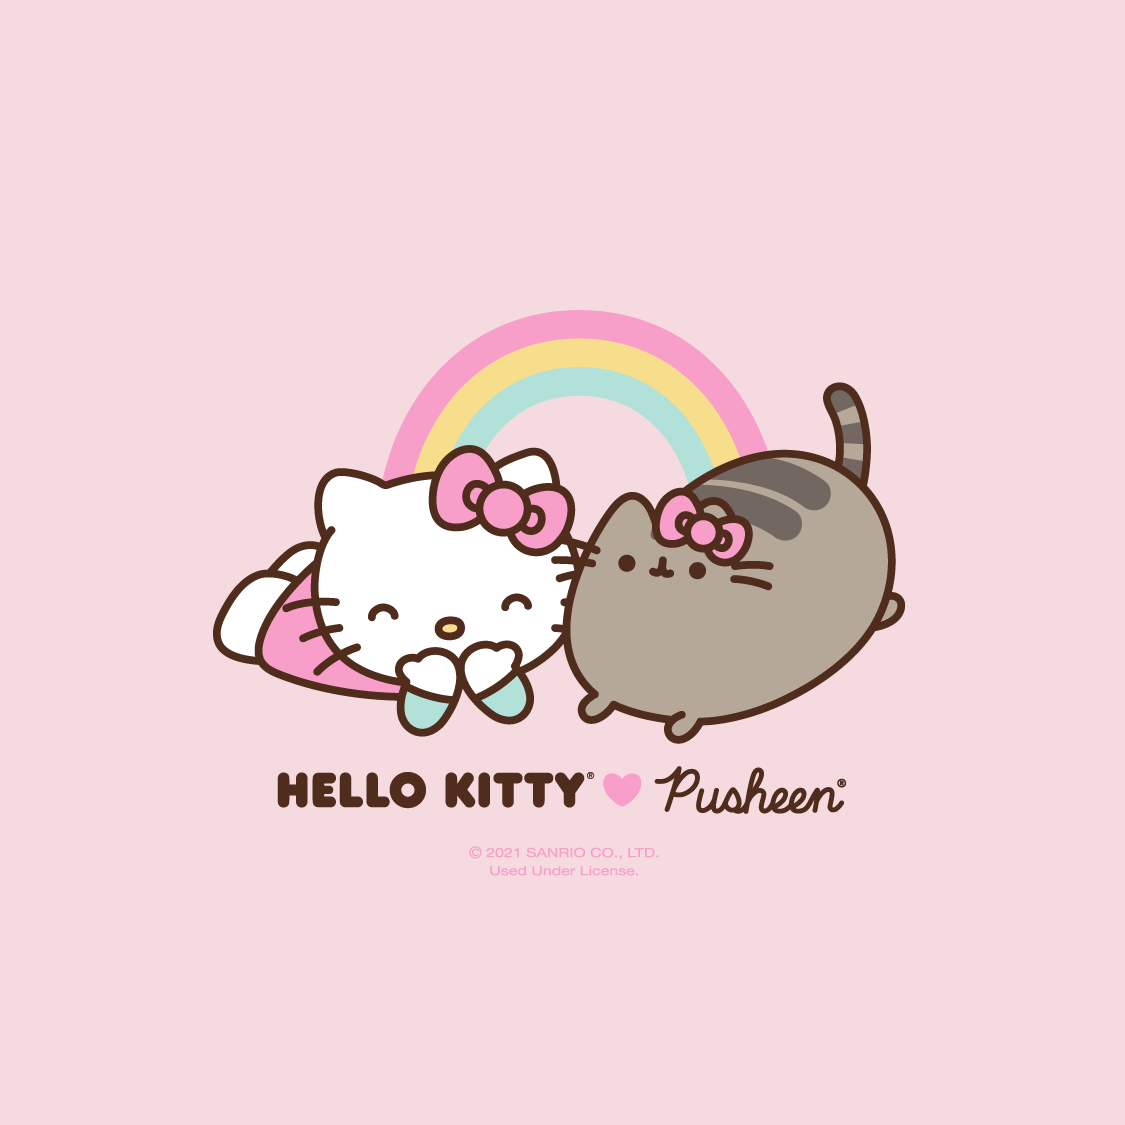 100+] Hello Kitty Pfp Wallpapers | Wallpapers.com